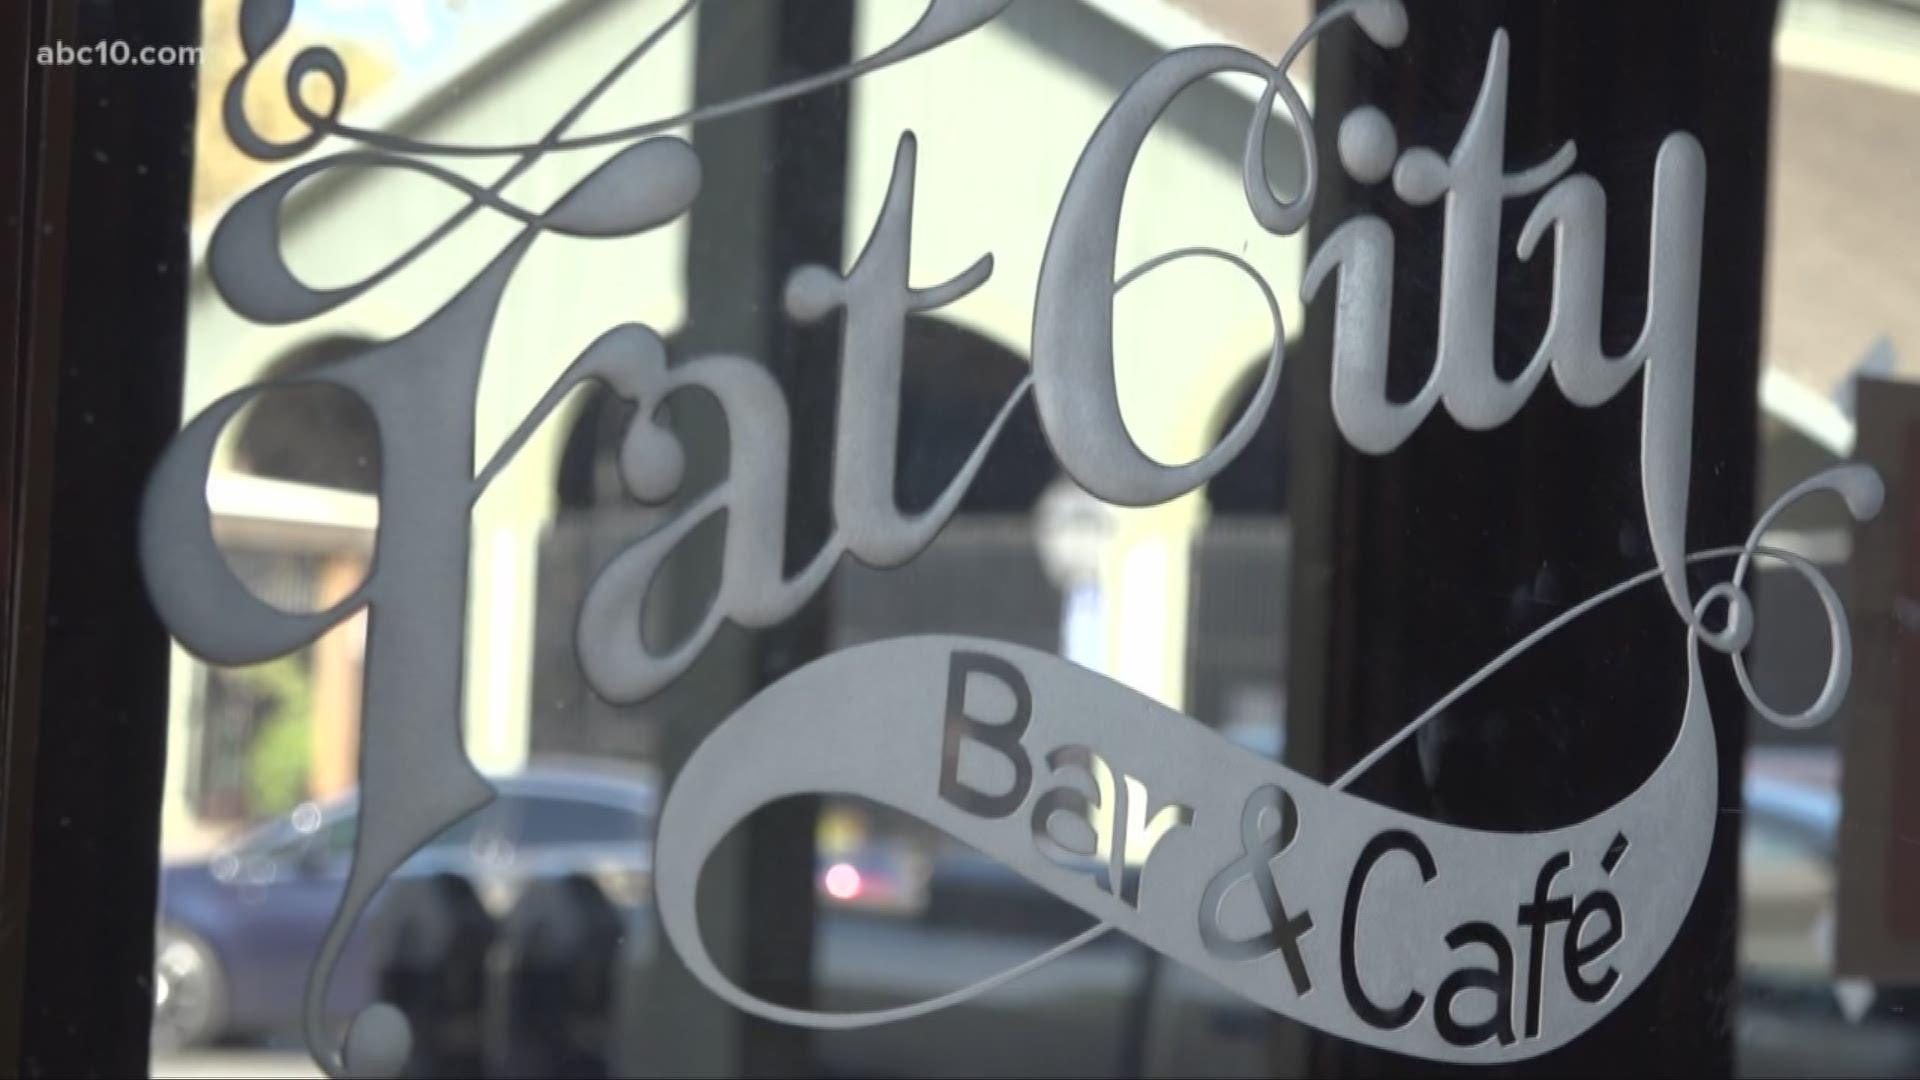 Folks will no longer be able to dine with the famous Purple Lady, as Fat City closes after a more than 40 year run.